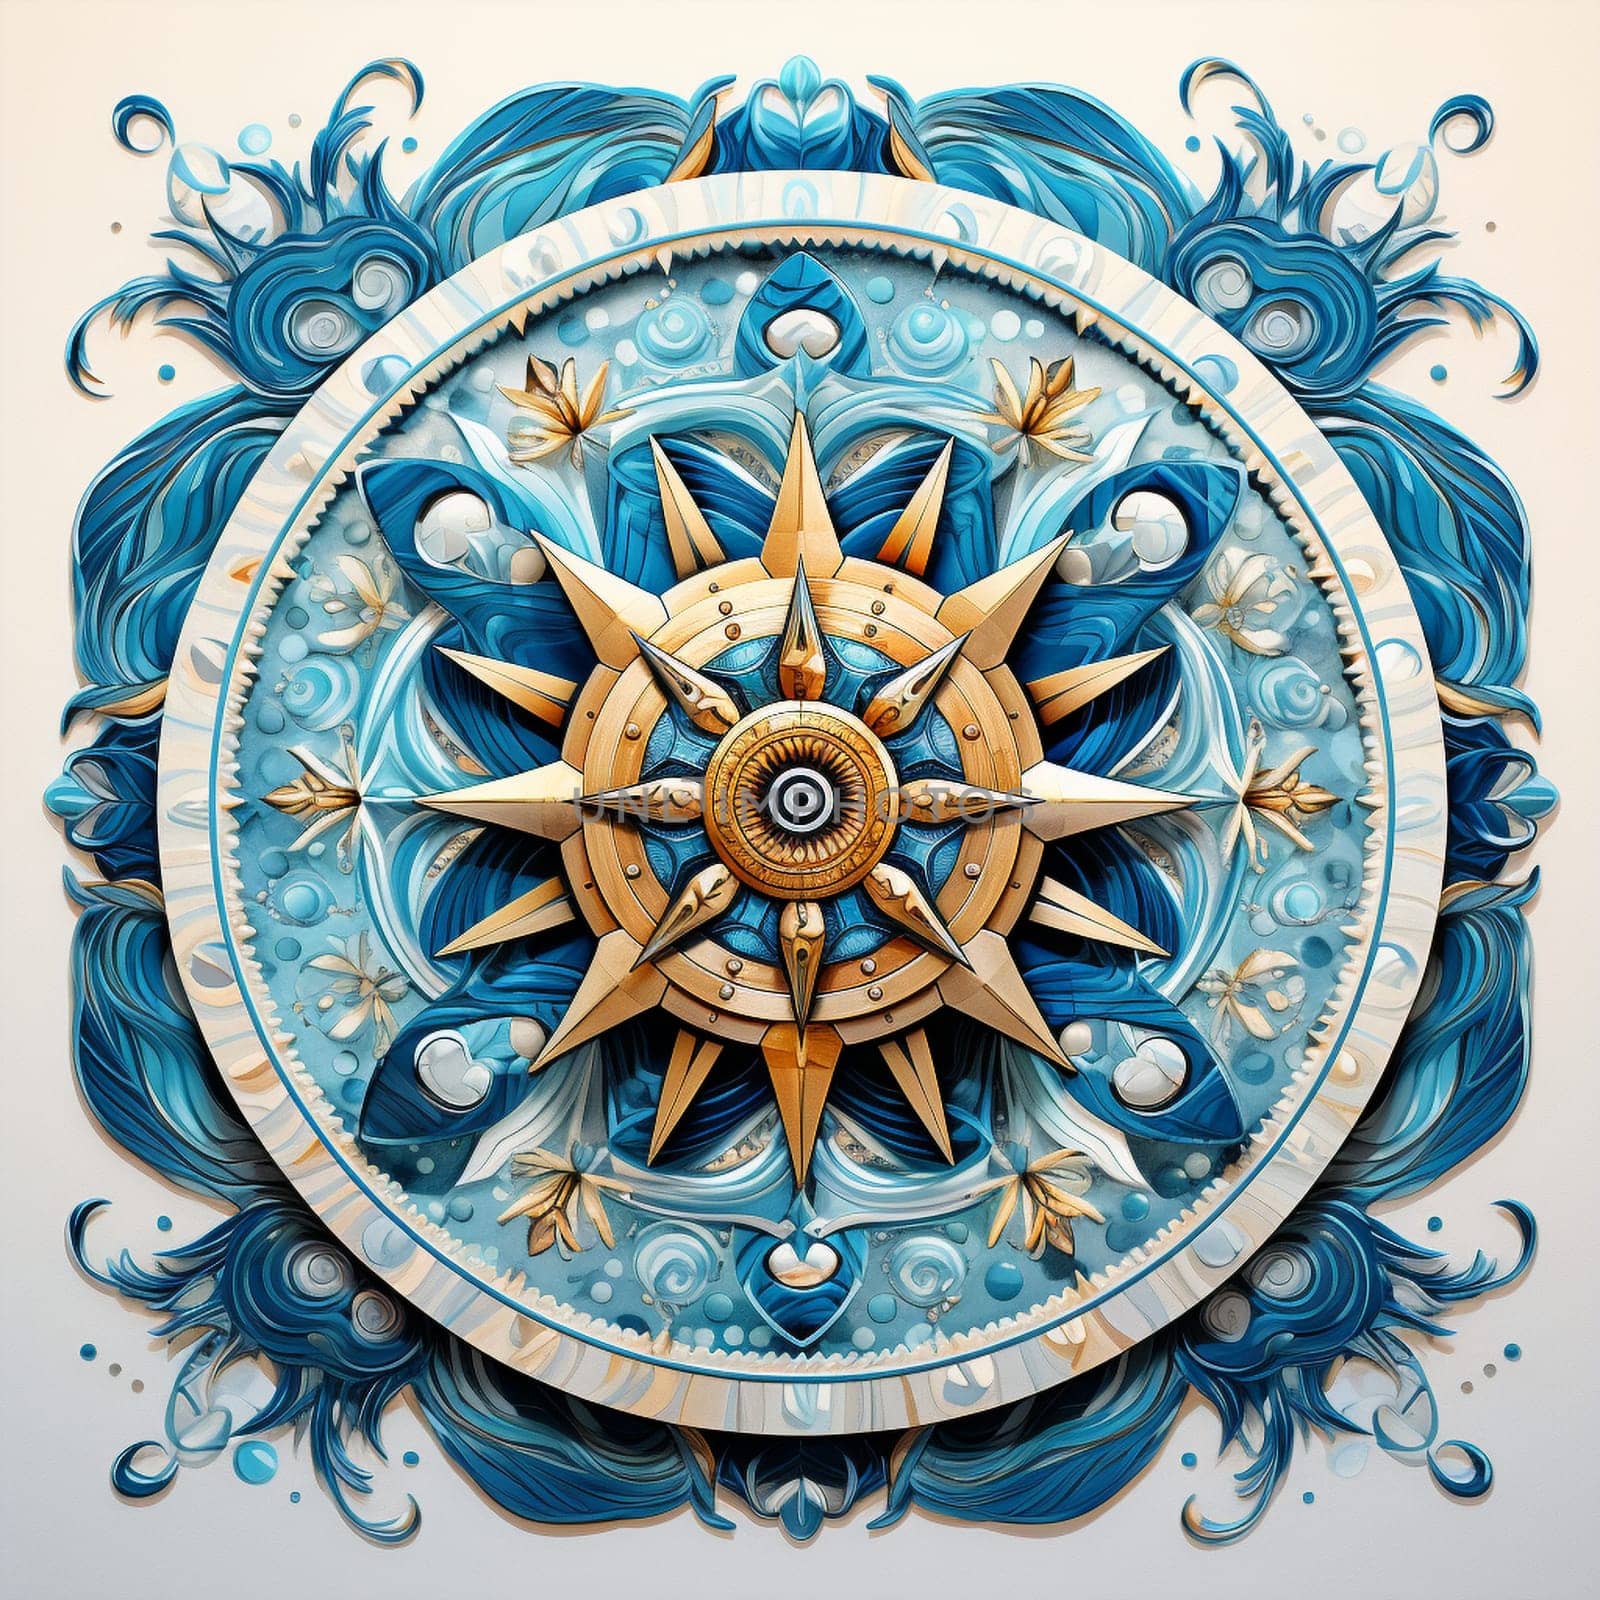 Nautical Kaleidoscope: A multidimensional exploration of maritime patterns and colors by Sahin